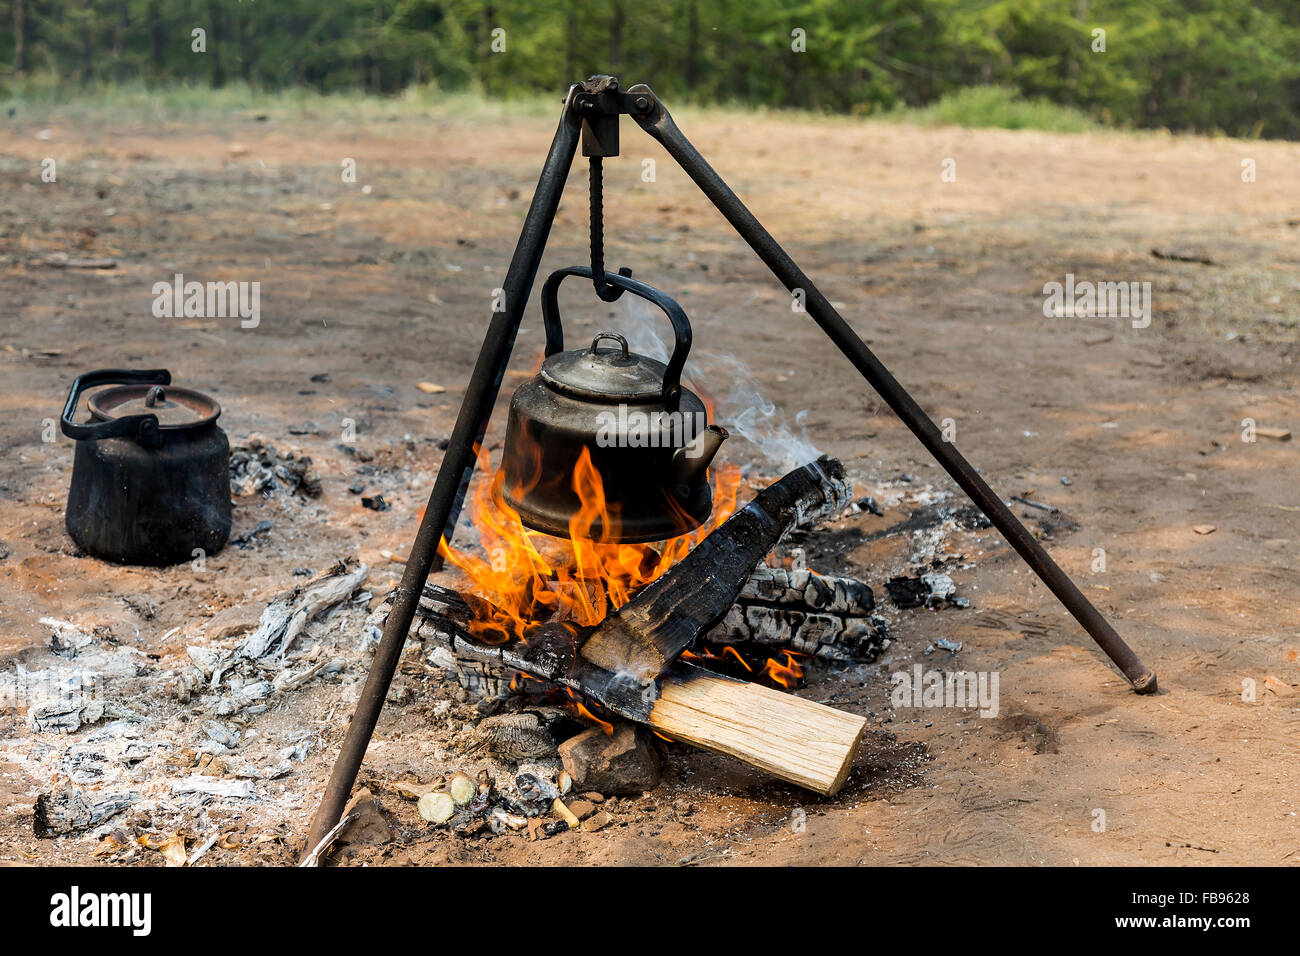 https://c8.alamy.com/comp/FB9628/kettle-hanged-upon-a-fire-at-a-campground-in-olkhon-island-lake-baikal-FB9628.jpg